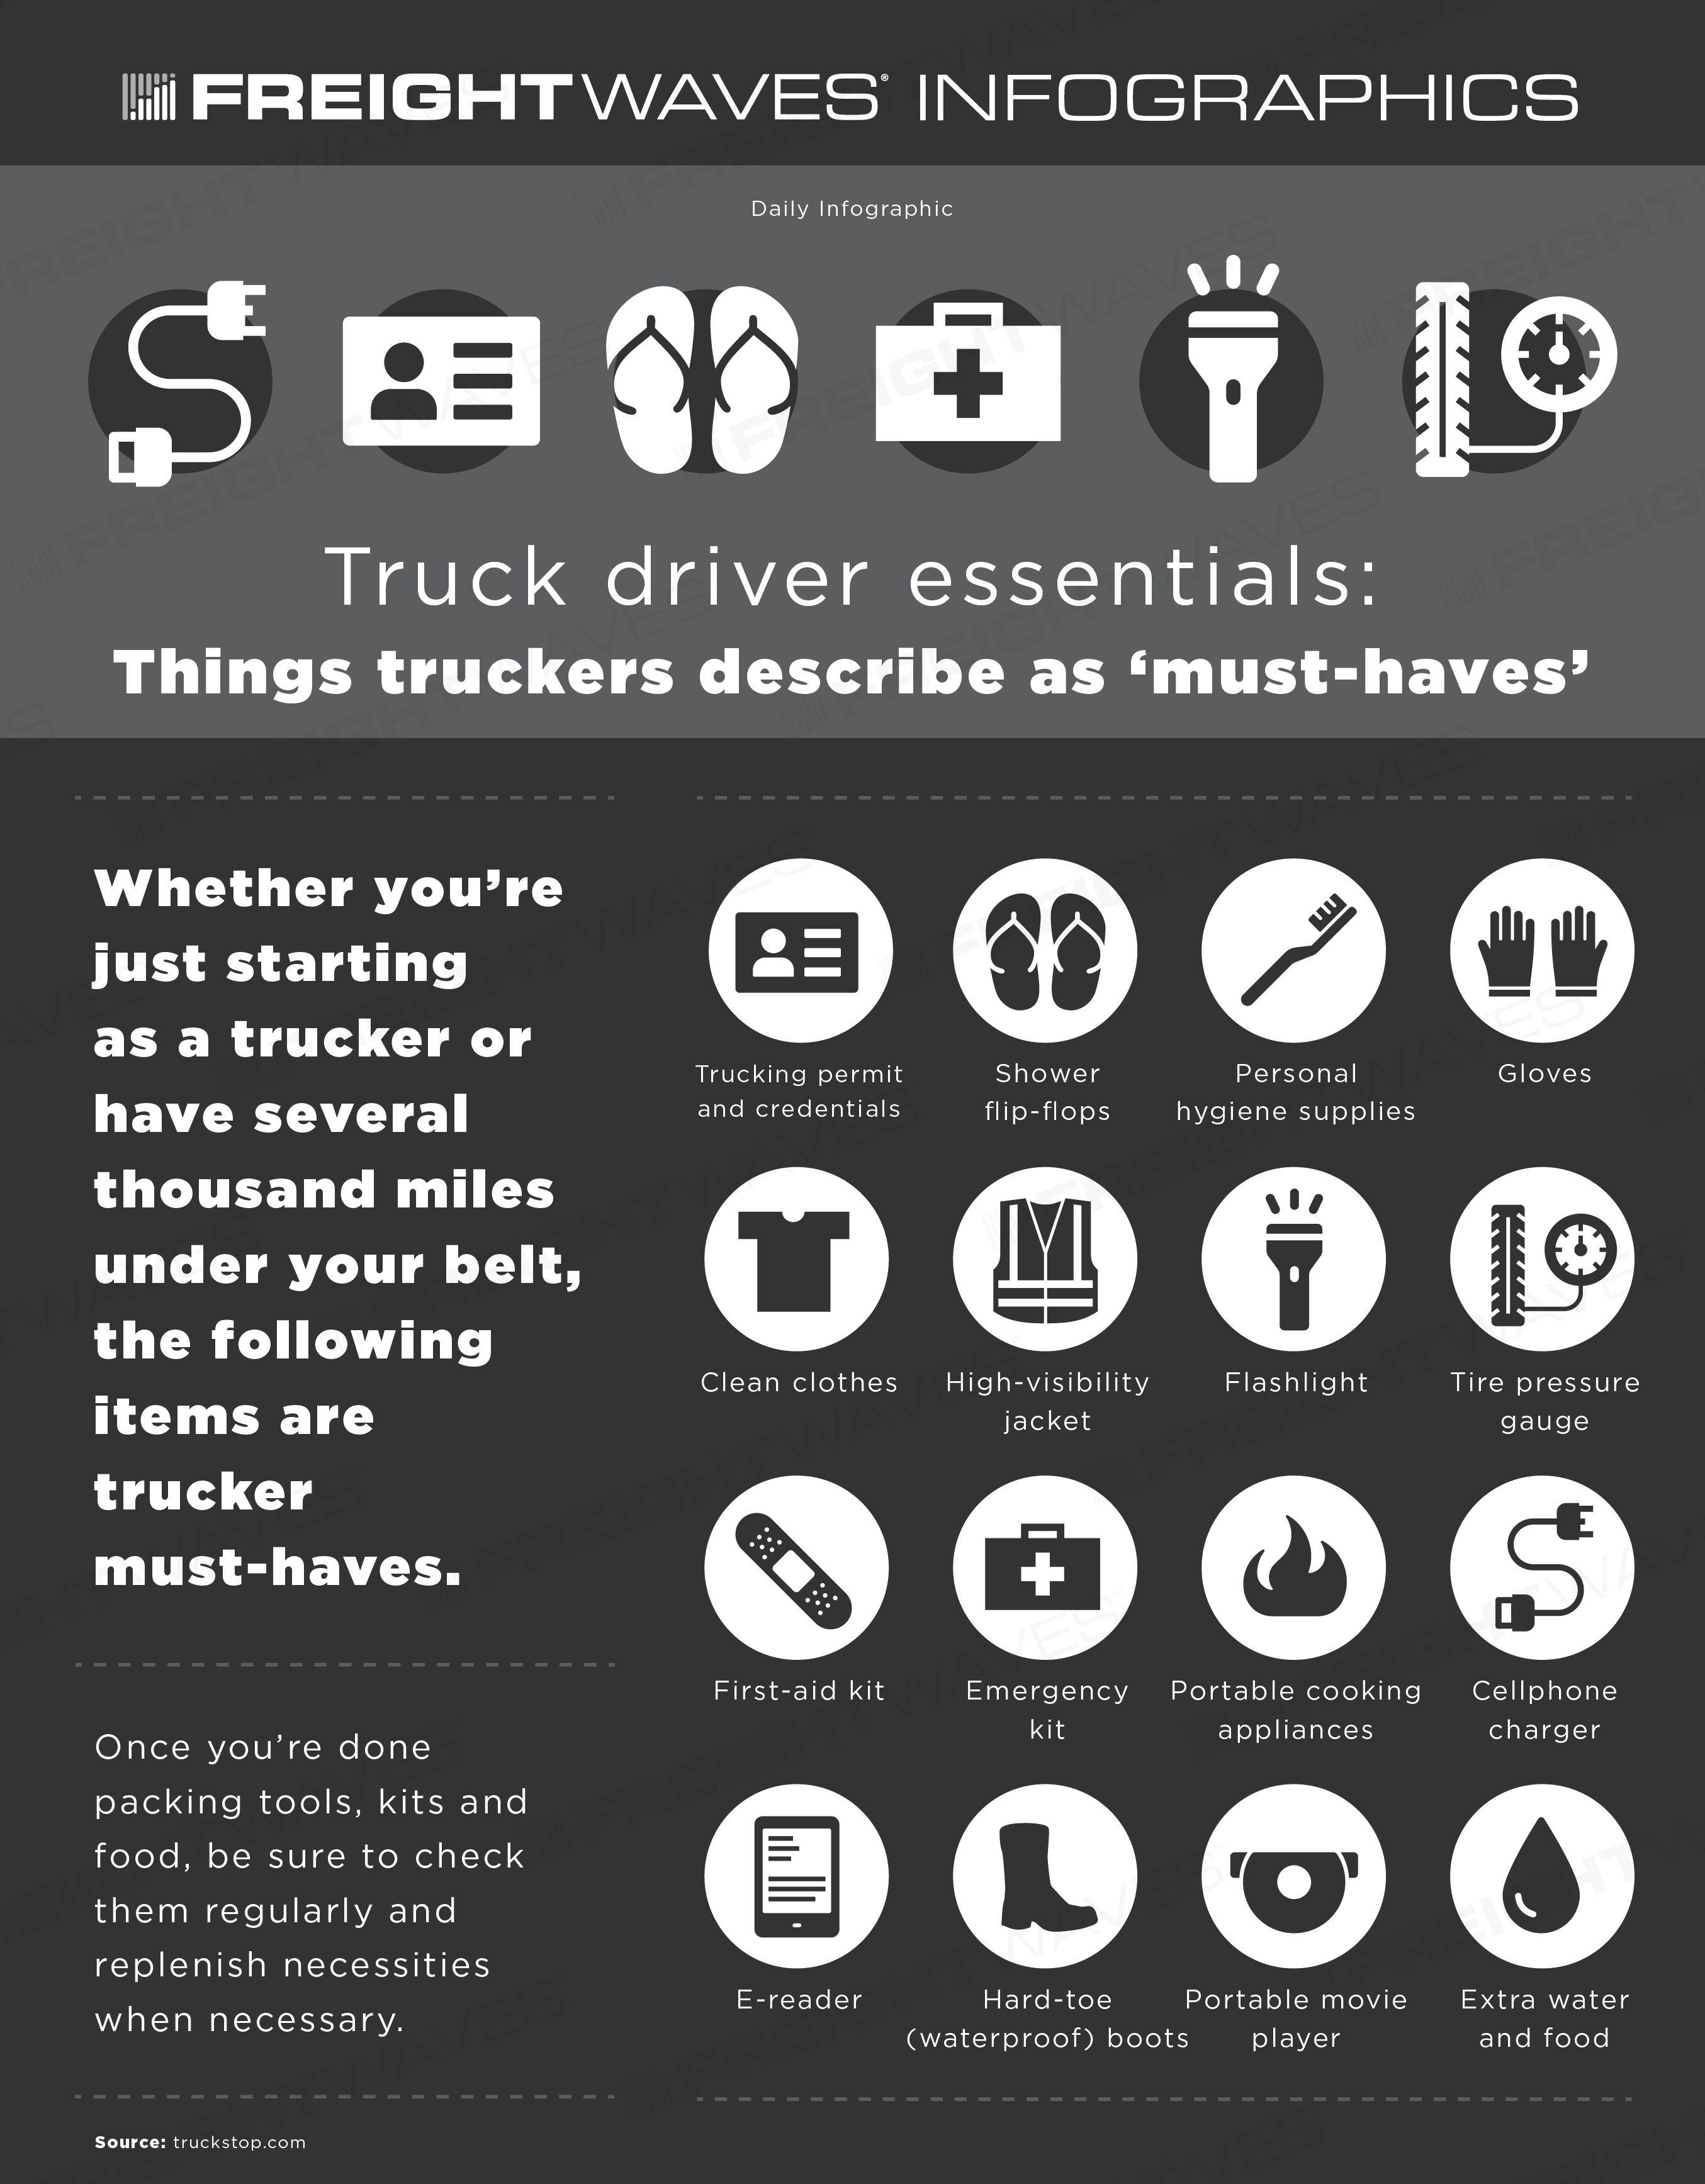 https://www.freightwaves.com/wp-content/uploads/2023/03/14/Truck-Driver-Essentials-19-Things-Truckers-Describe-as-Must-Haves_03-16-23_full-ignore.jpg